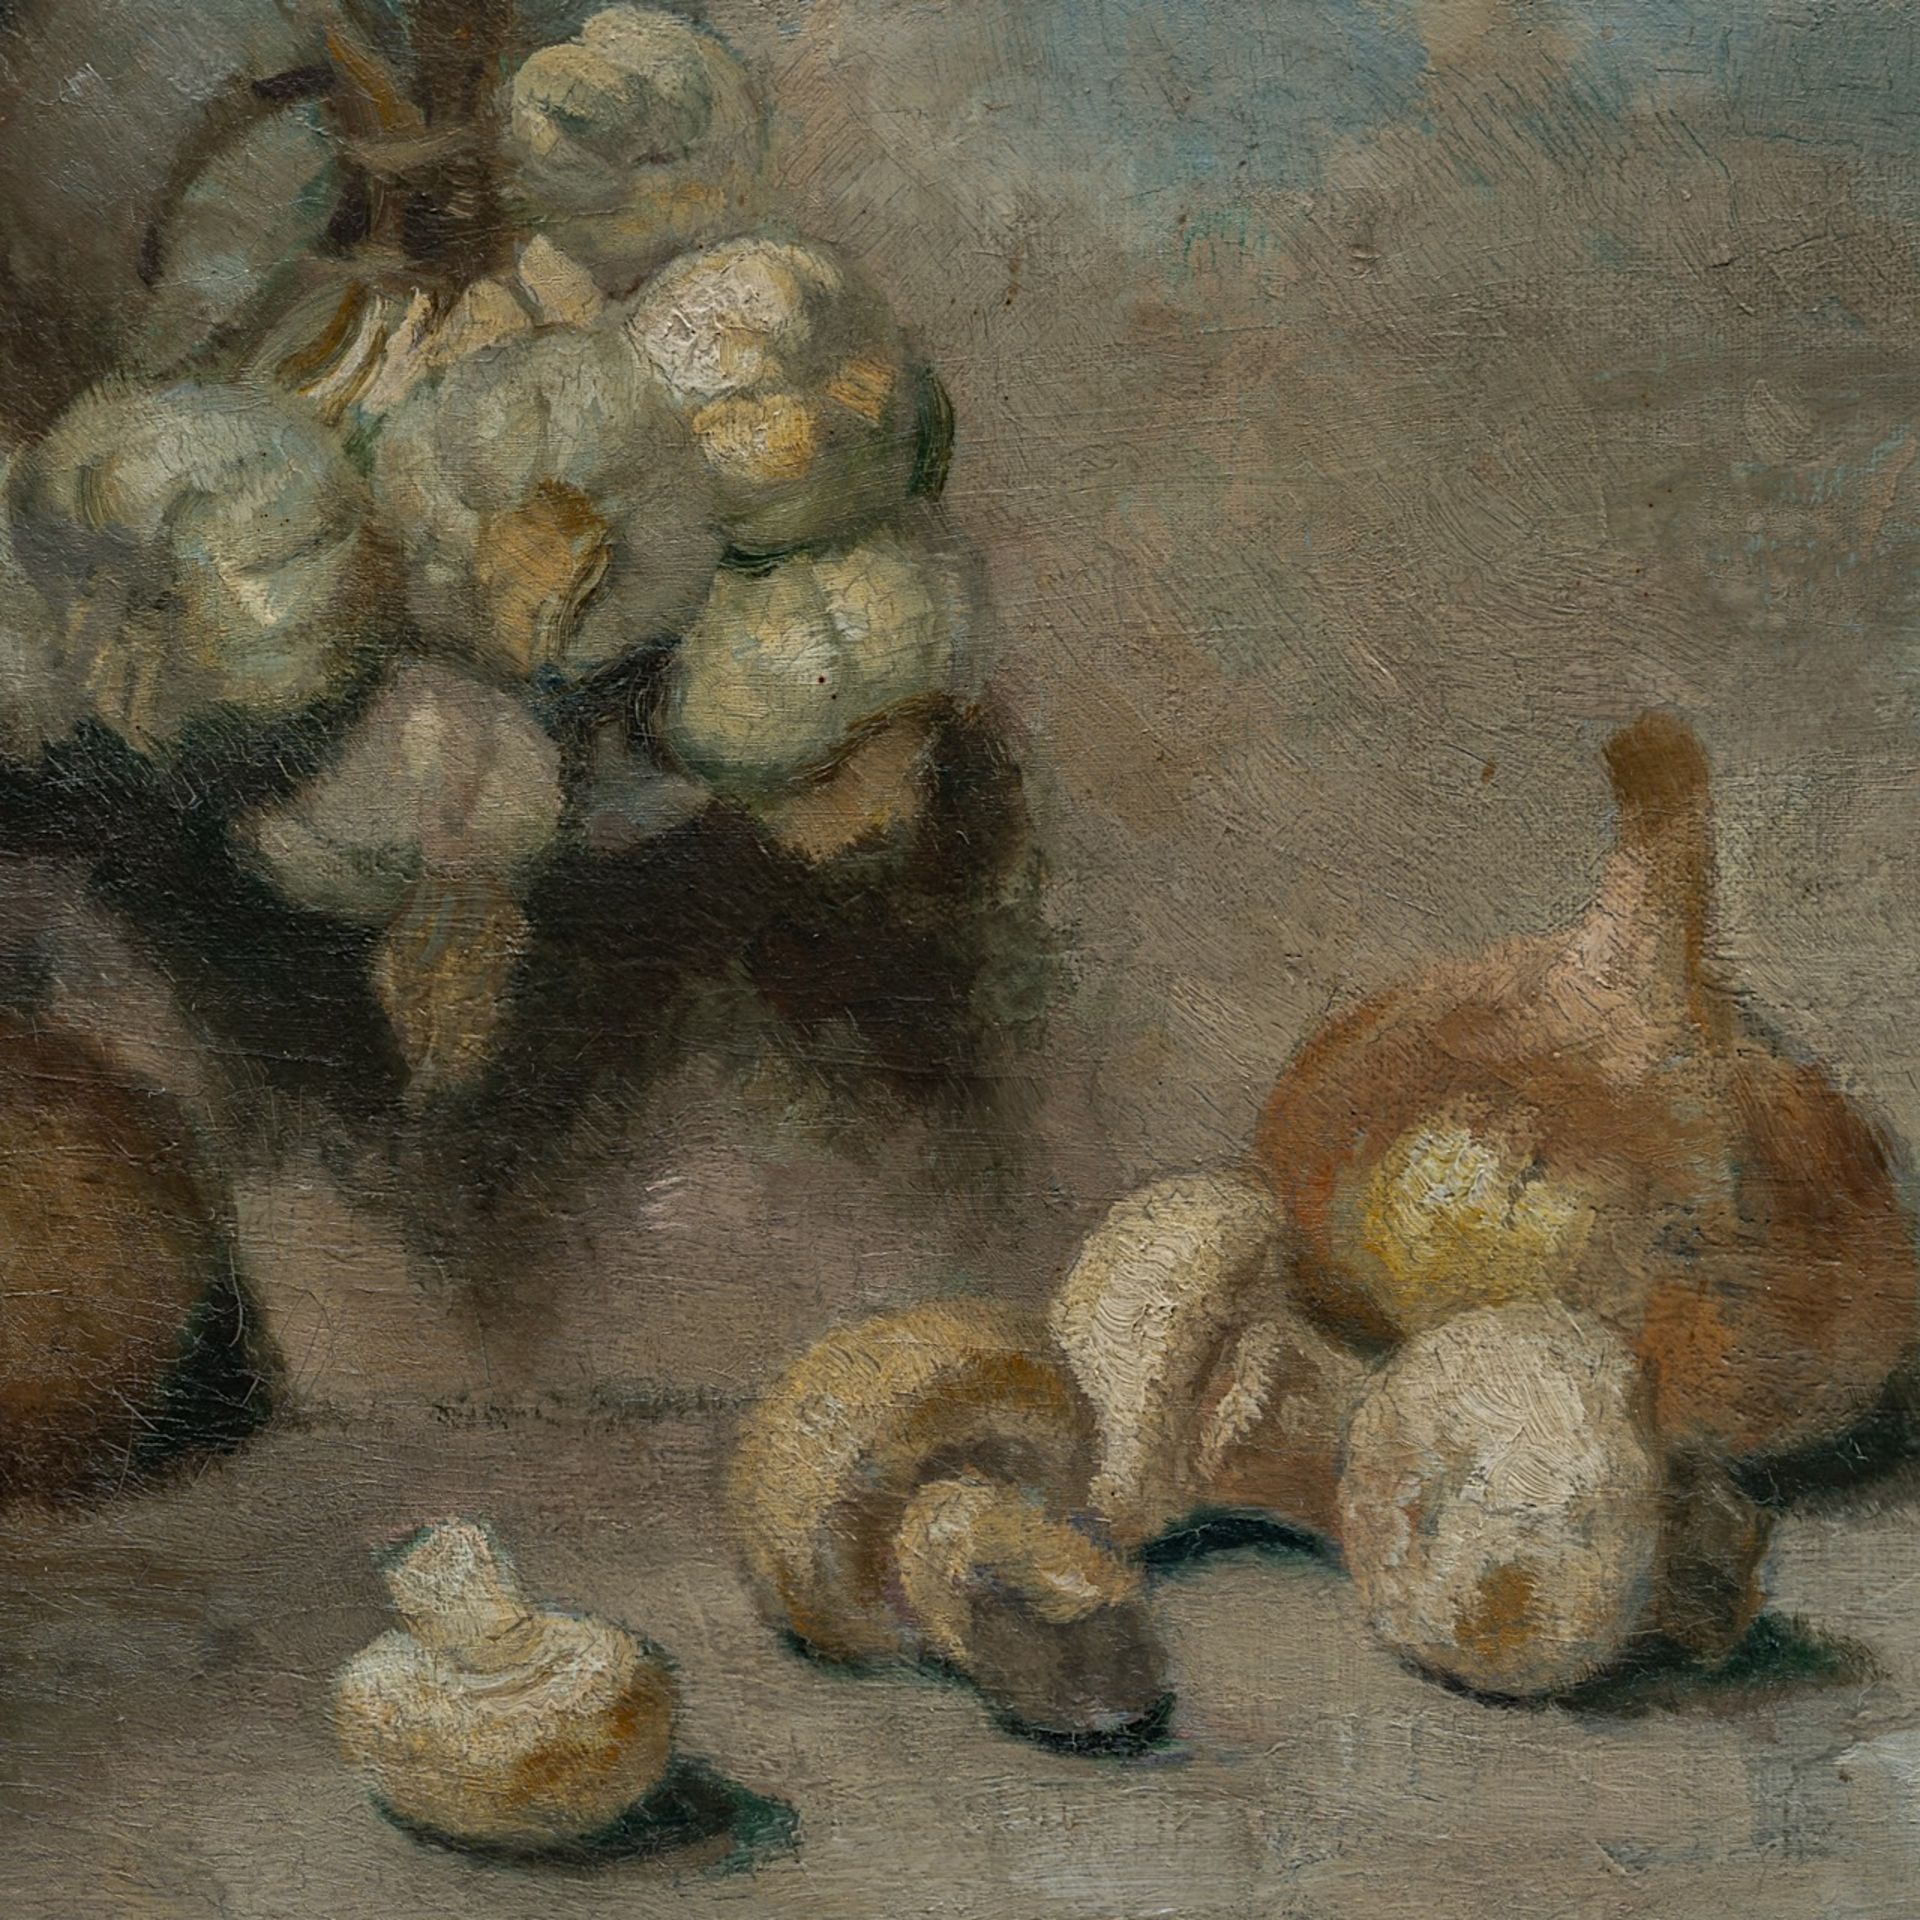 Maurice Sijs (1880-1972), still life with garlic, mushrooms and an onion, oil on canvas 36 x 43 cm. - Image 6 of 6